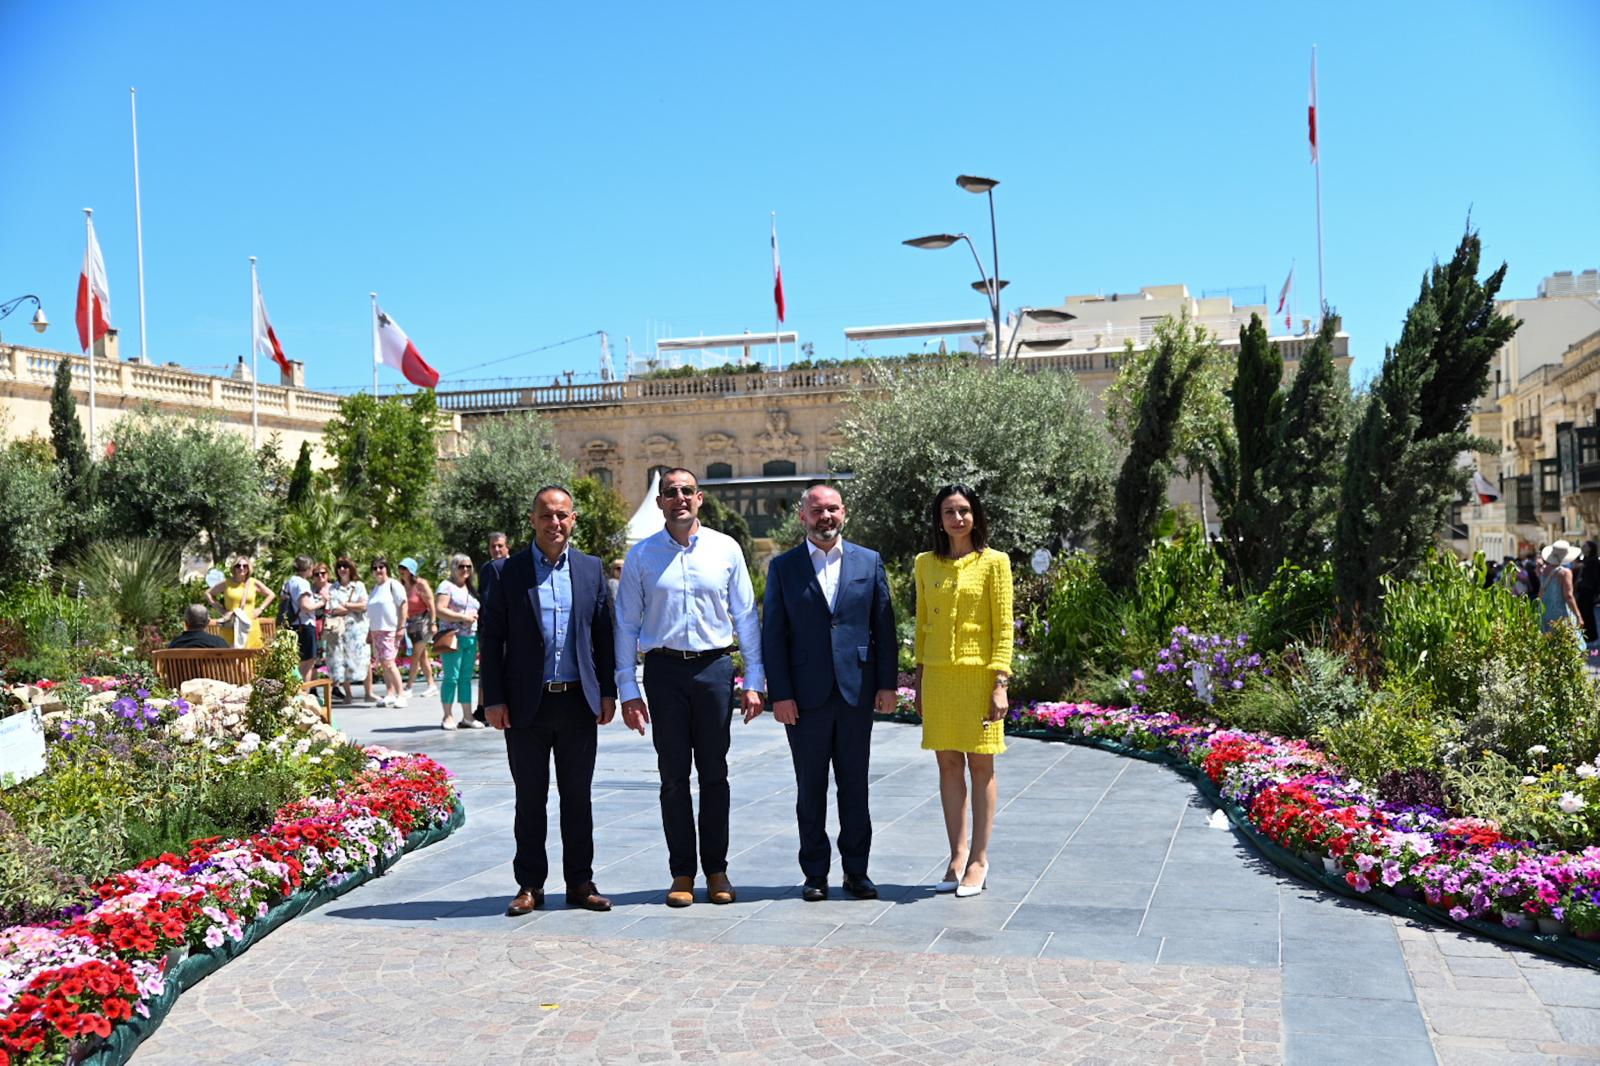 A photo showing Prime Minister Robert Abela with the Minister for National Heritage, the Arts and Local Government Owen Bonnici, and VCA Chairman and CEO Jason Micallef and Catherine Tabone, respectively